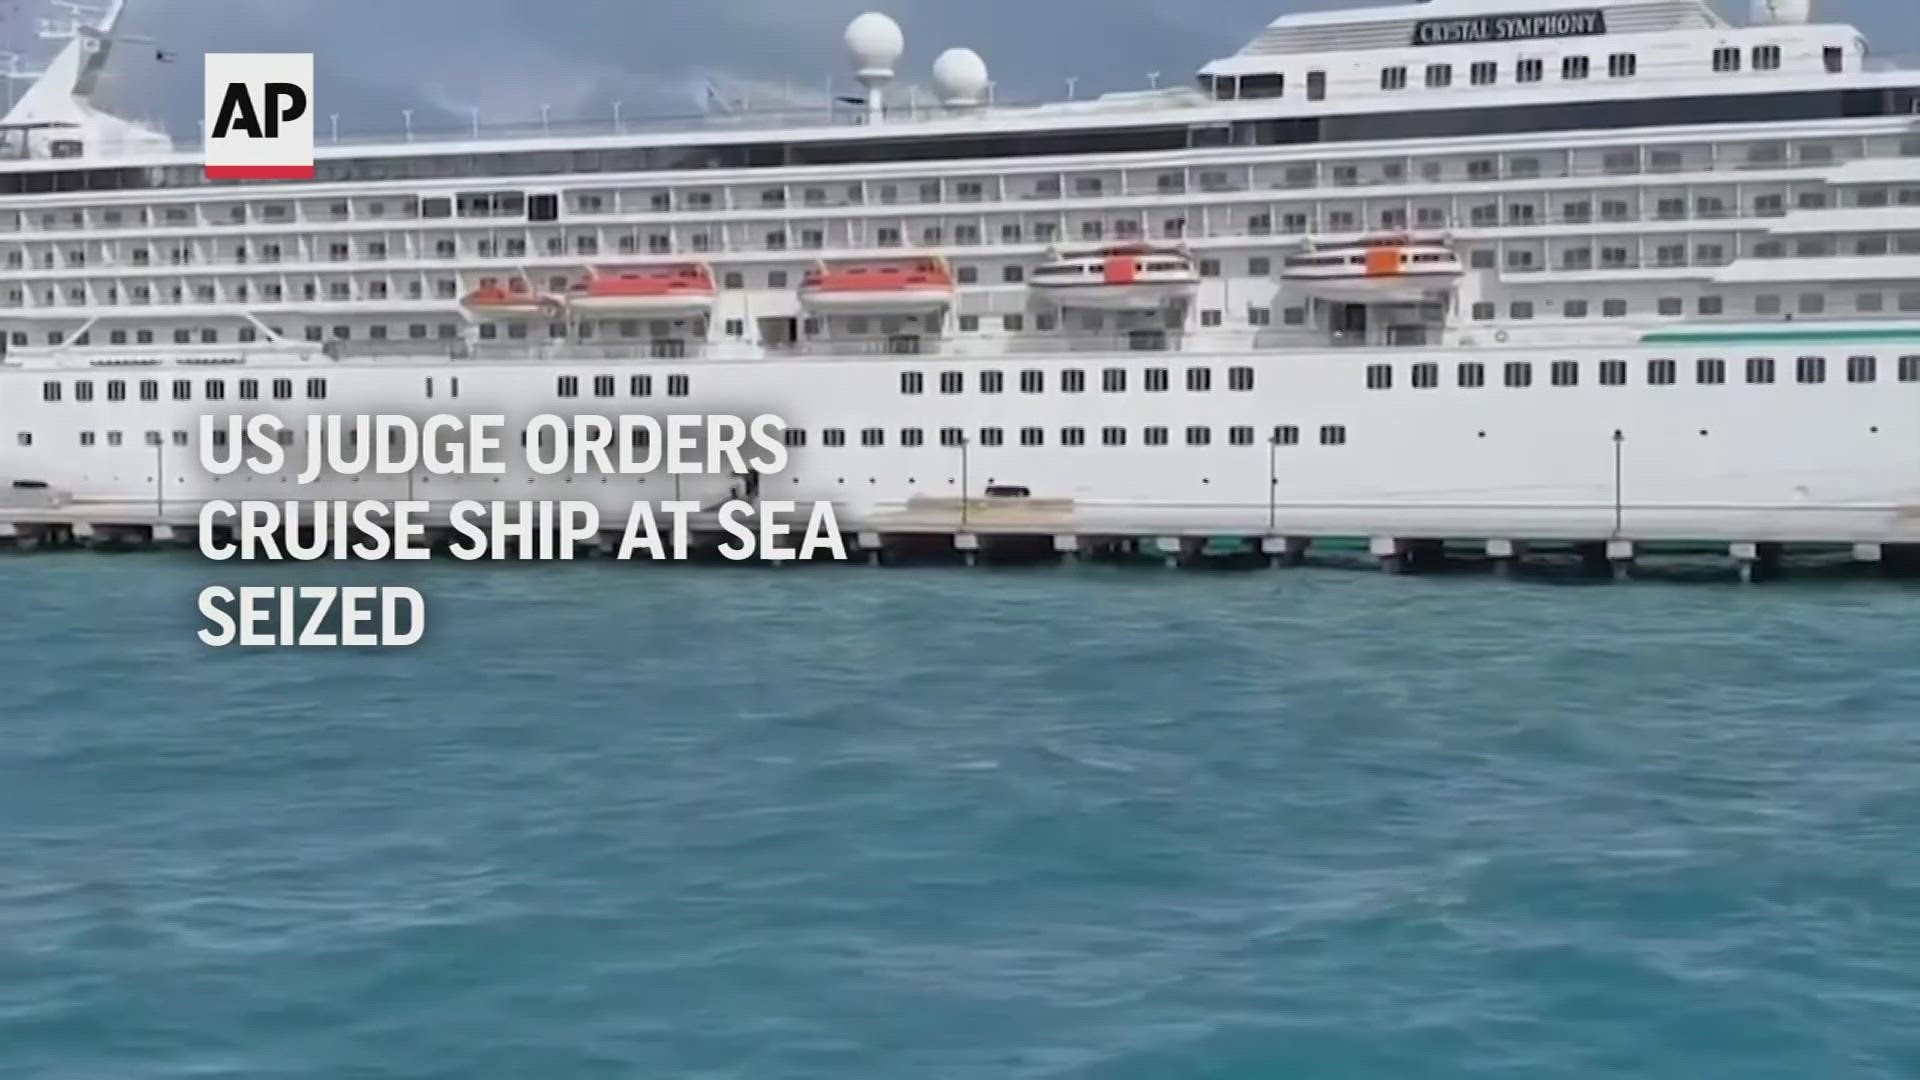 A cruise ship that was supposed to dock in Miami has instead sailed to the Bahamas, after a U.S. judge granted an order to seize the vessel as part of a lawsuit.